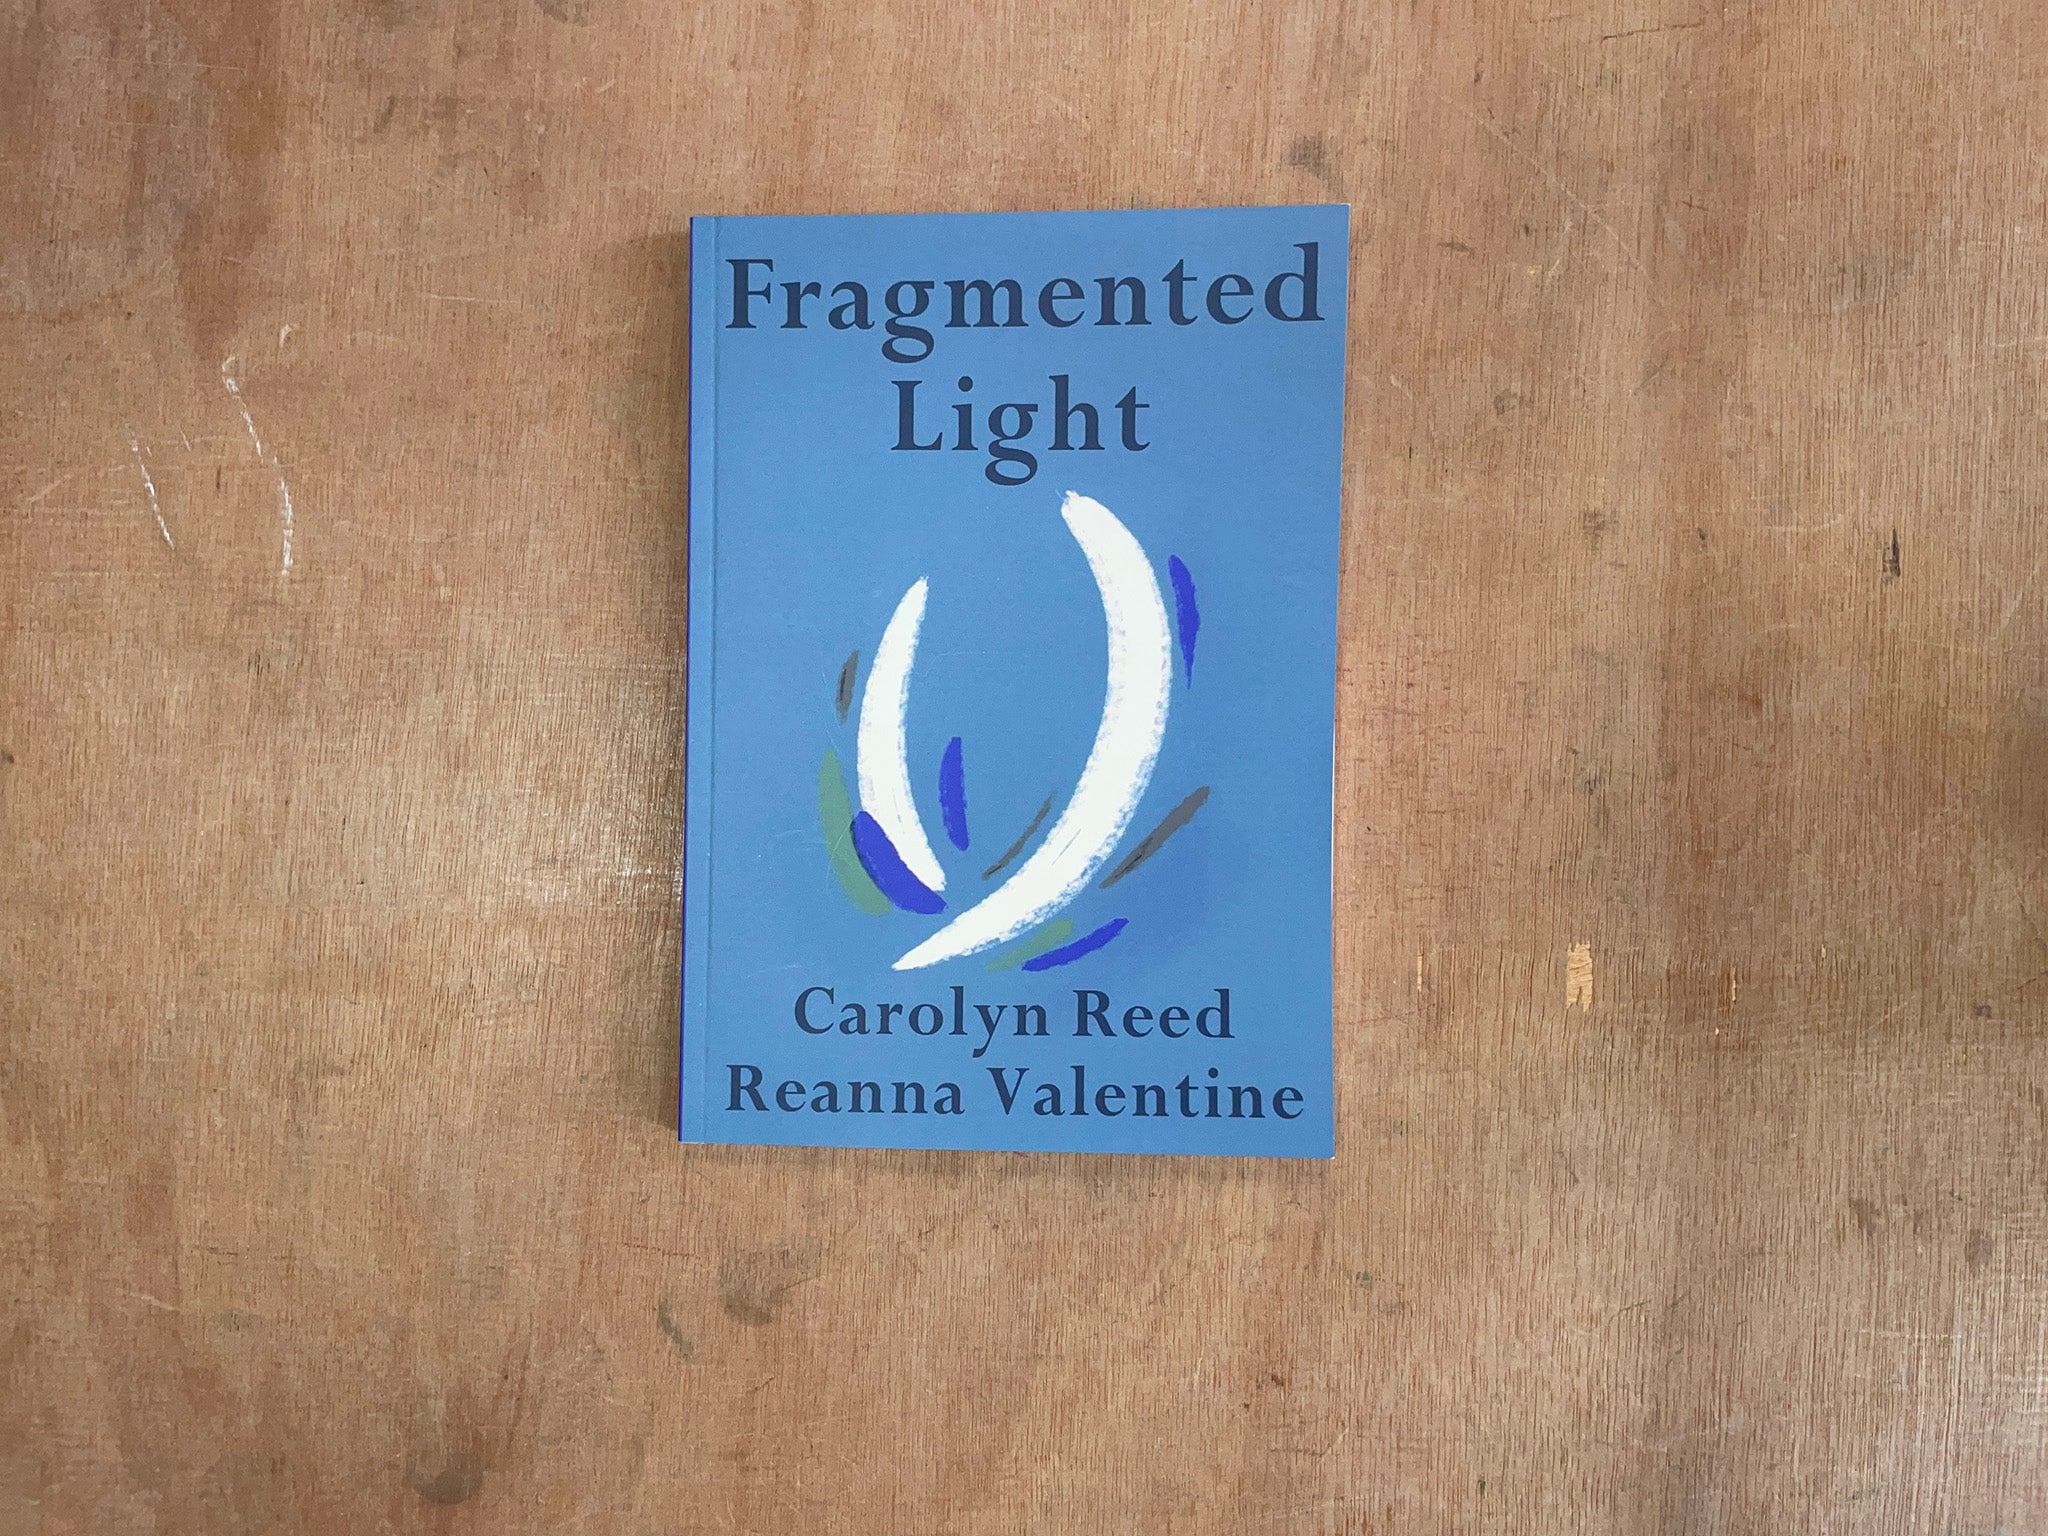 FRAGMENTED LIGHT by Carolyn Reed & Reanna Valentine